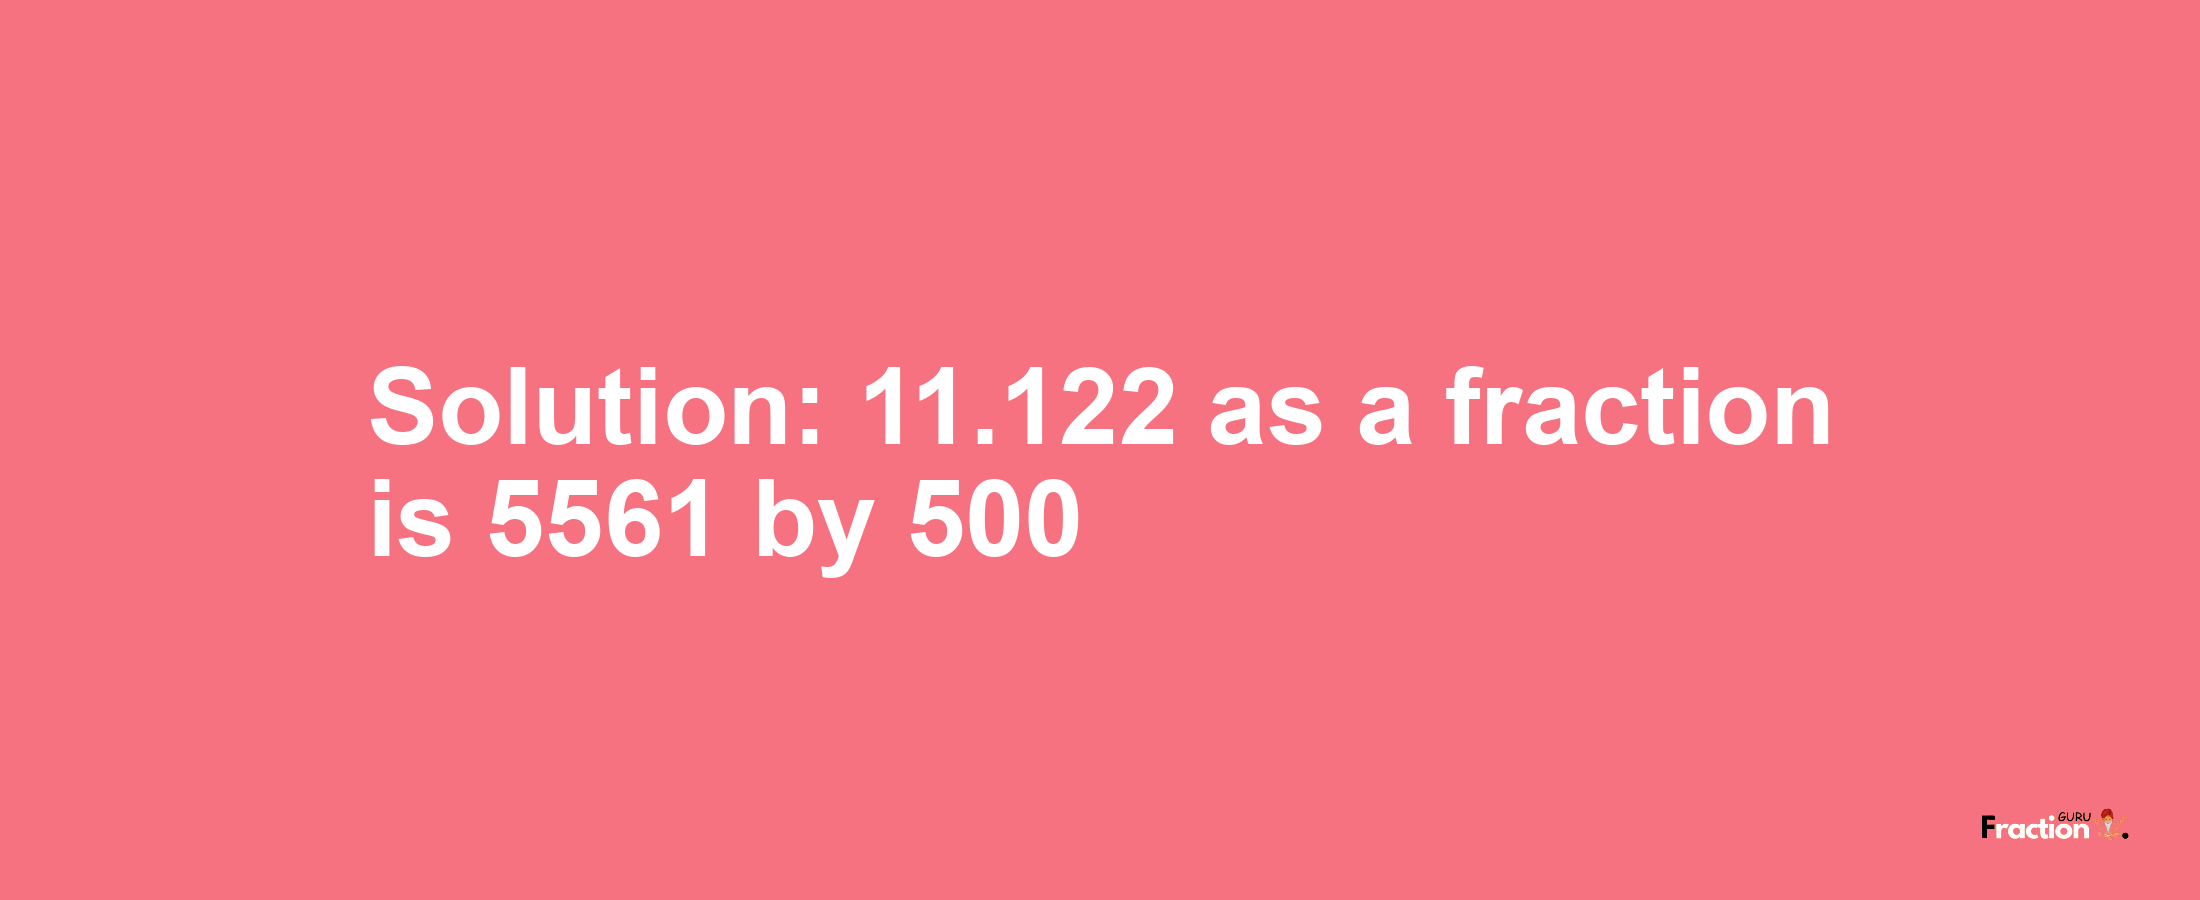 Solution:11.122 as a fraction is 5561/500